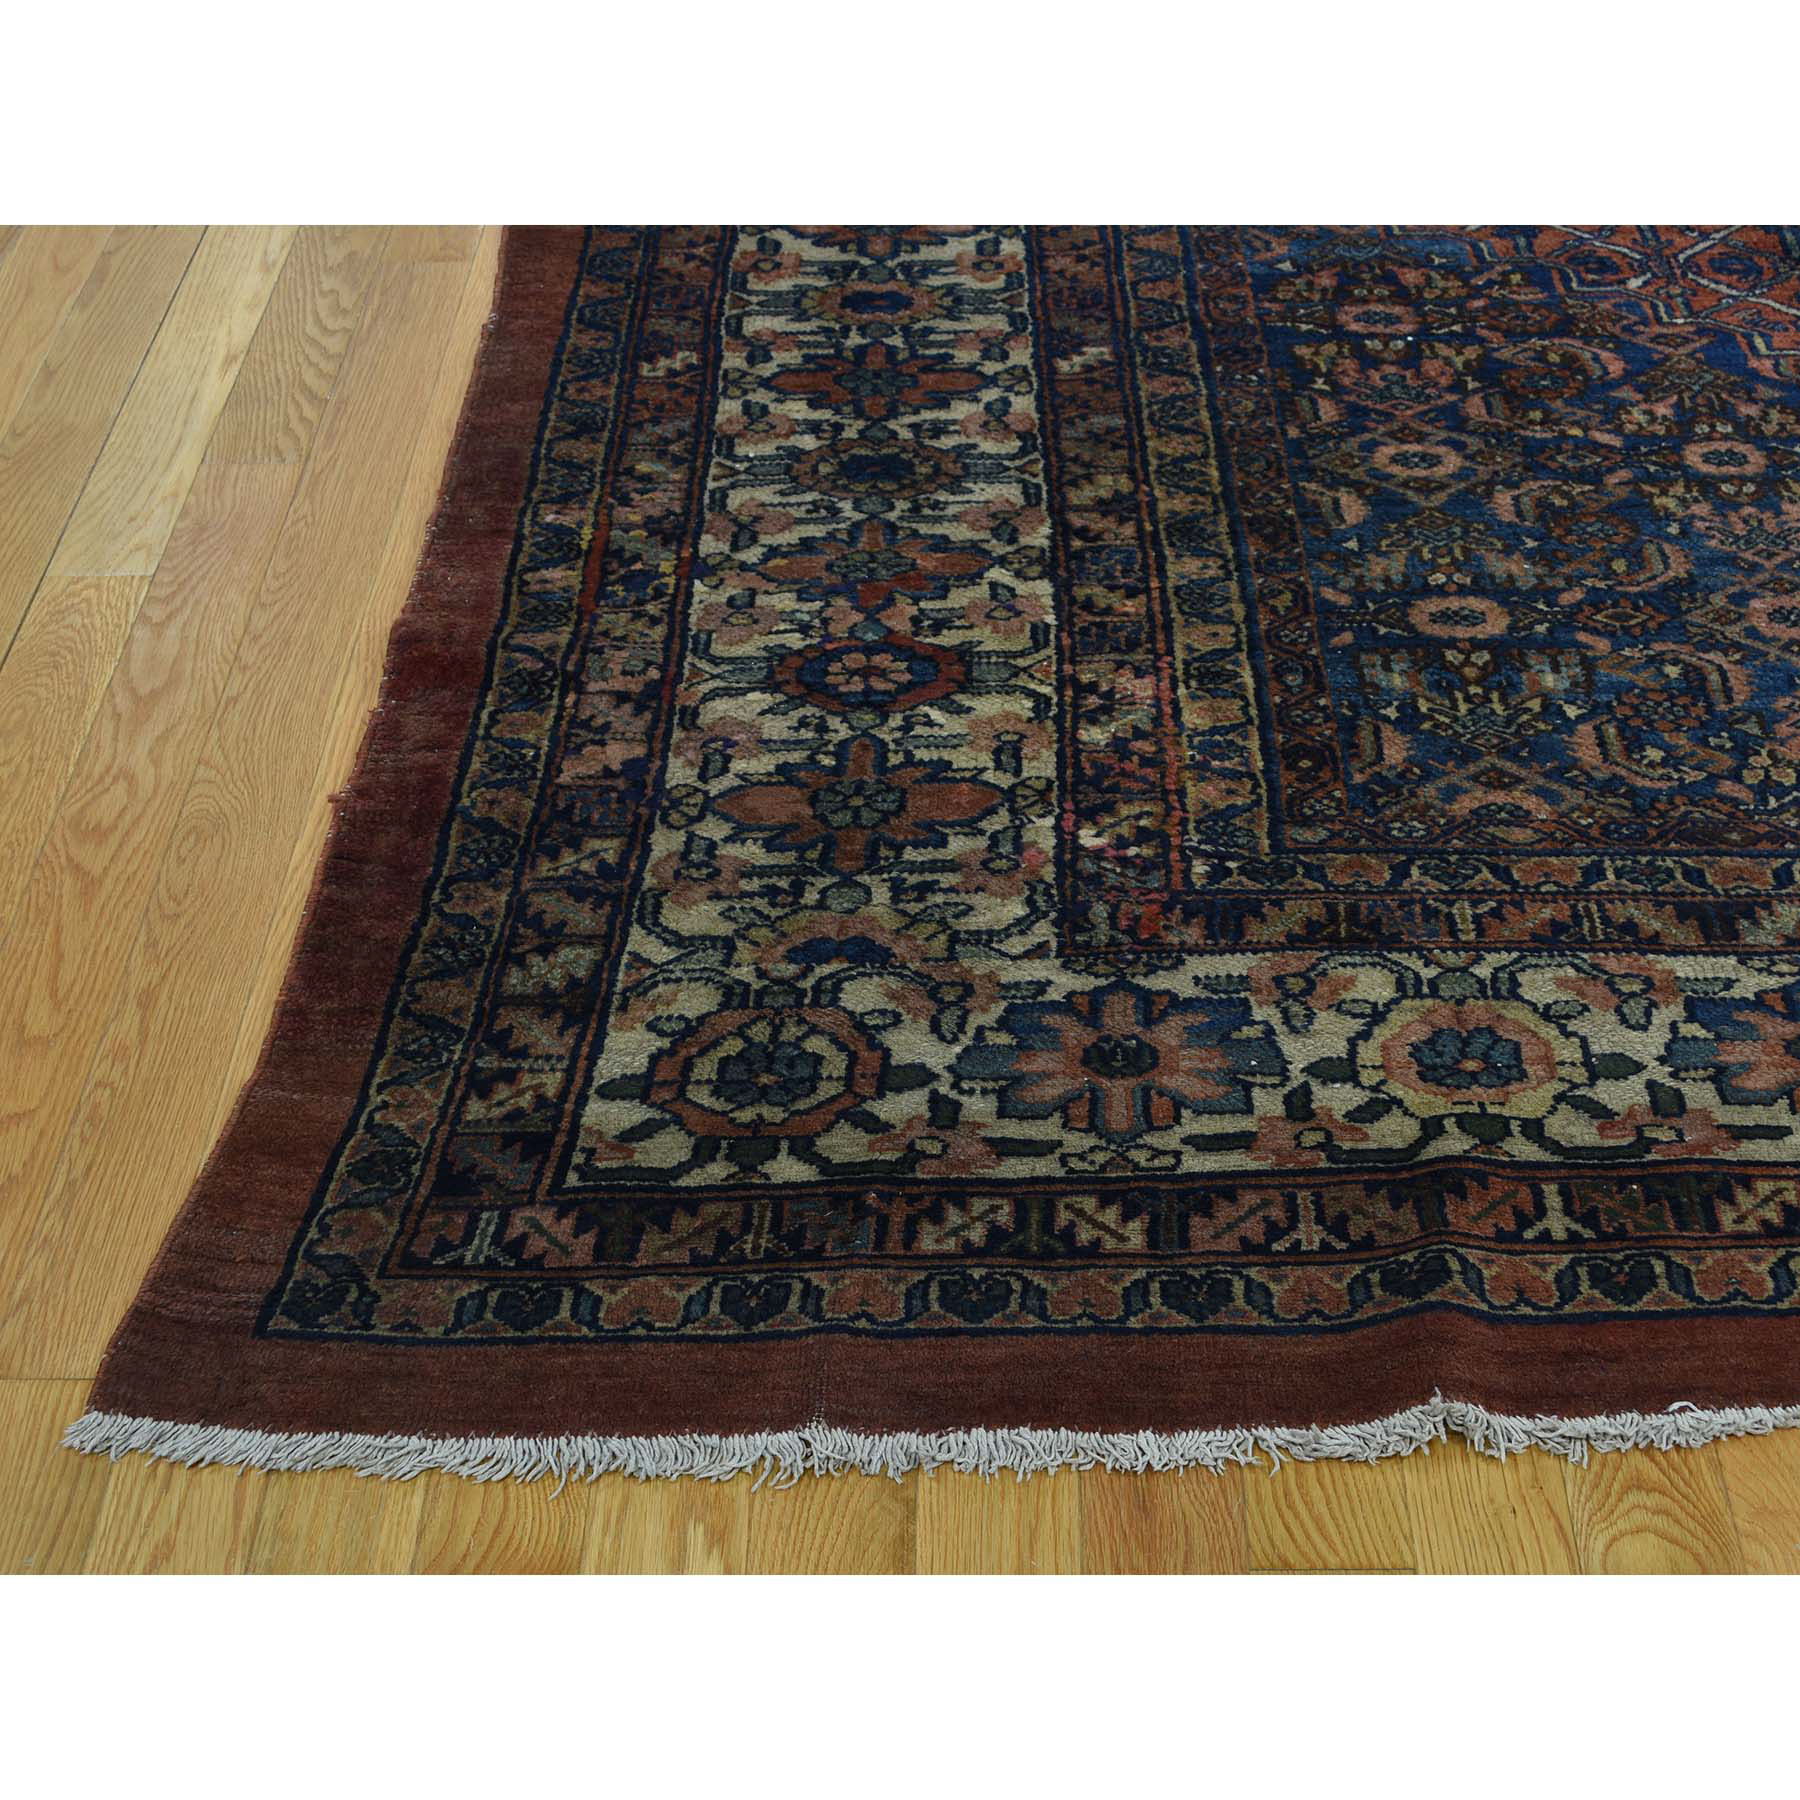 11'10"x23'4" Antique Persian Bibikabad Hand Woven Gallery Size Rug 